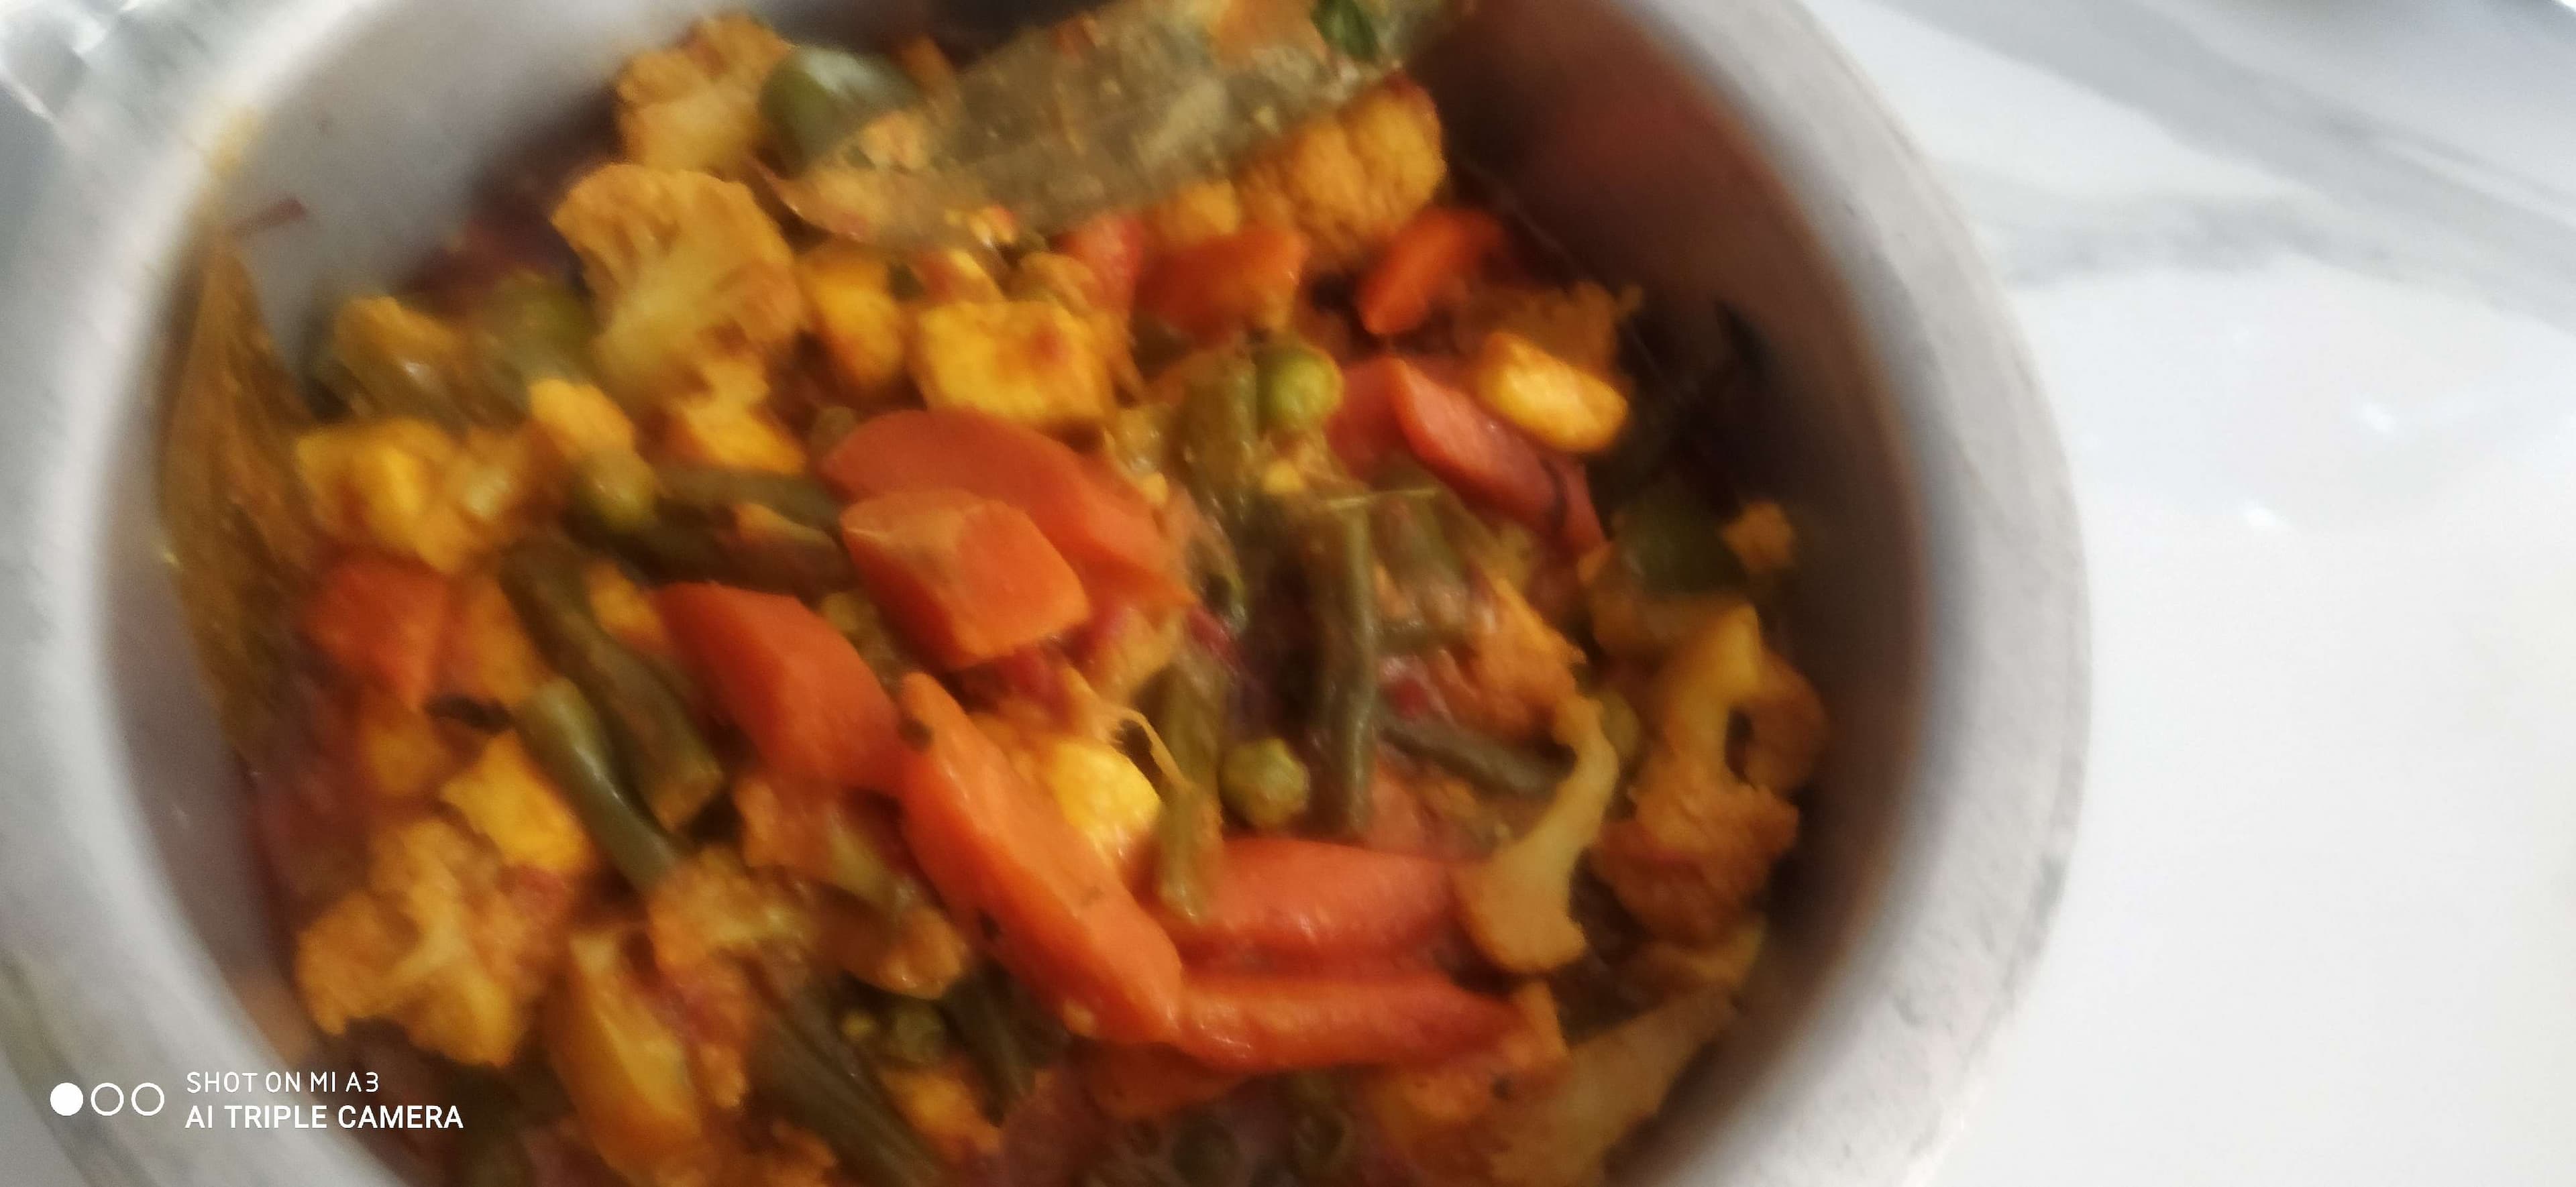 Tasty Mix Veg cooked by COOX chefs cooks during occasions parties events at home